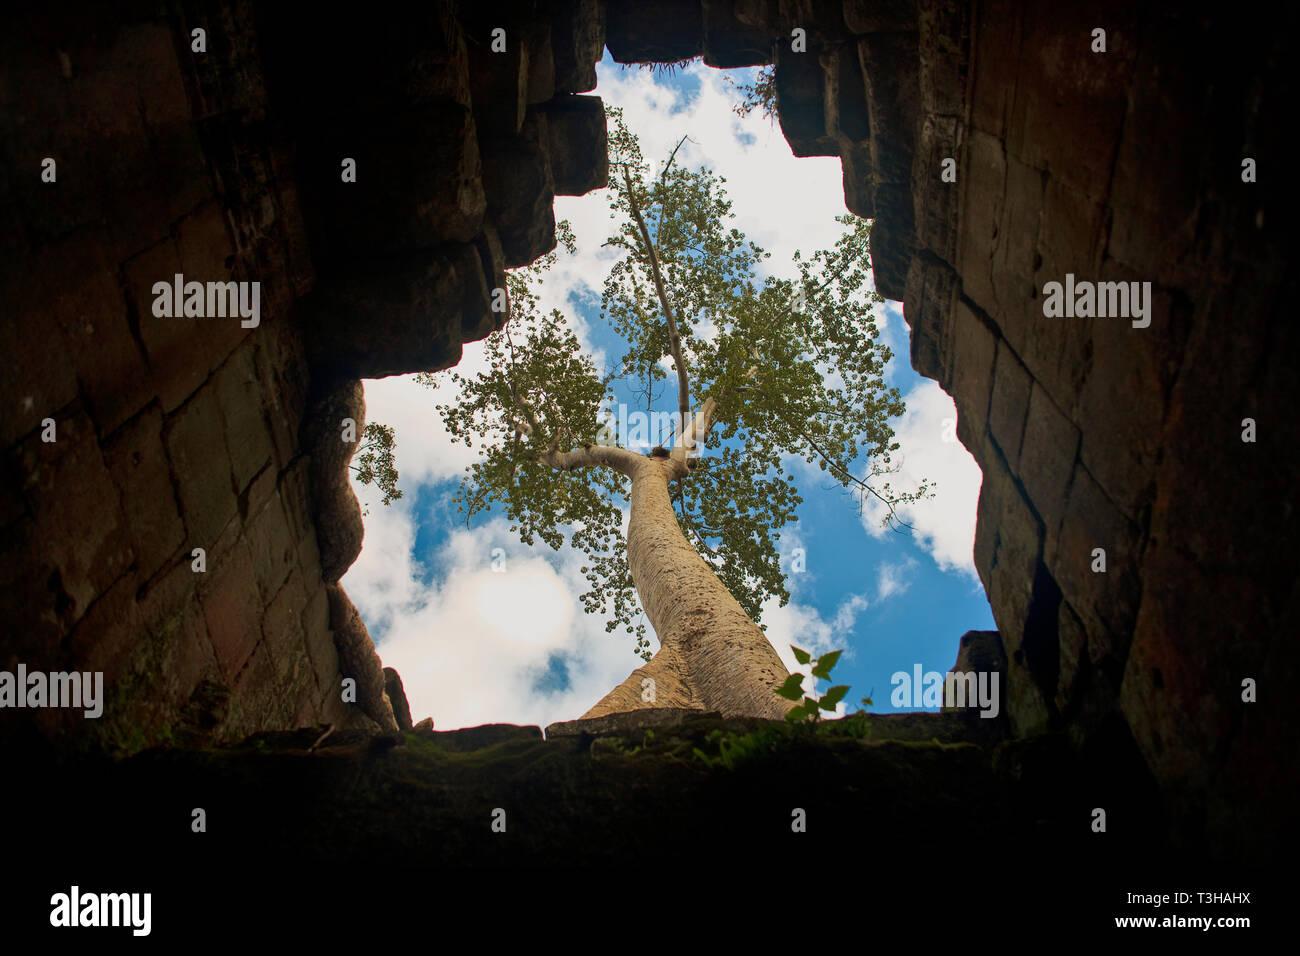 Tree growing over an underground temple. Stock Photo